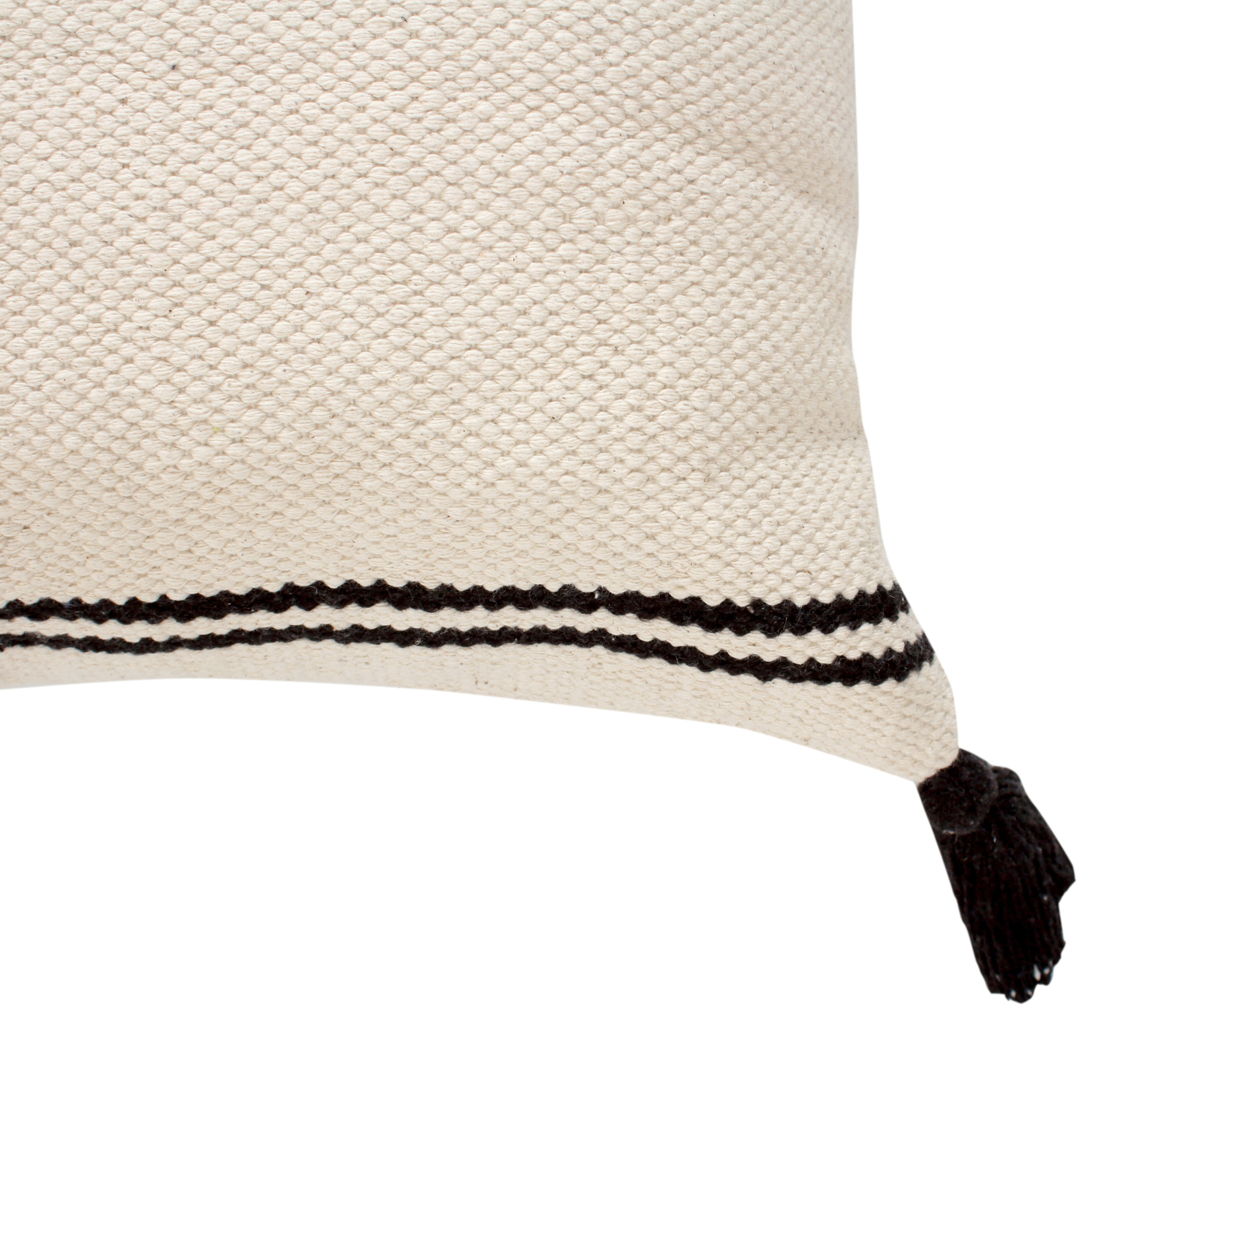 18 X 18 Square Cotton Accent Throw Pillow With Simple Striped Pattern And Tassels, Set Of 2, White And Black